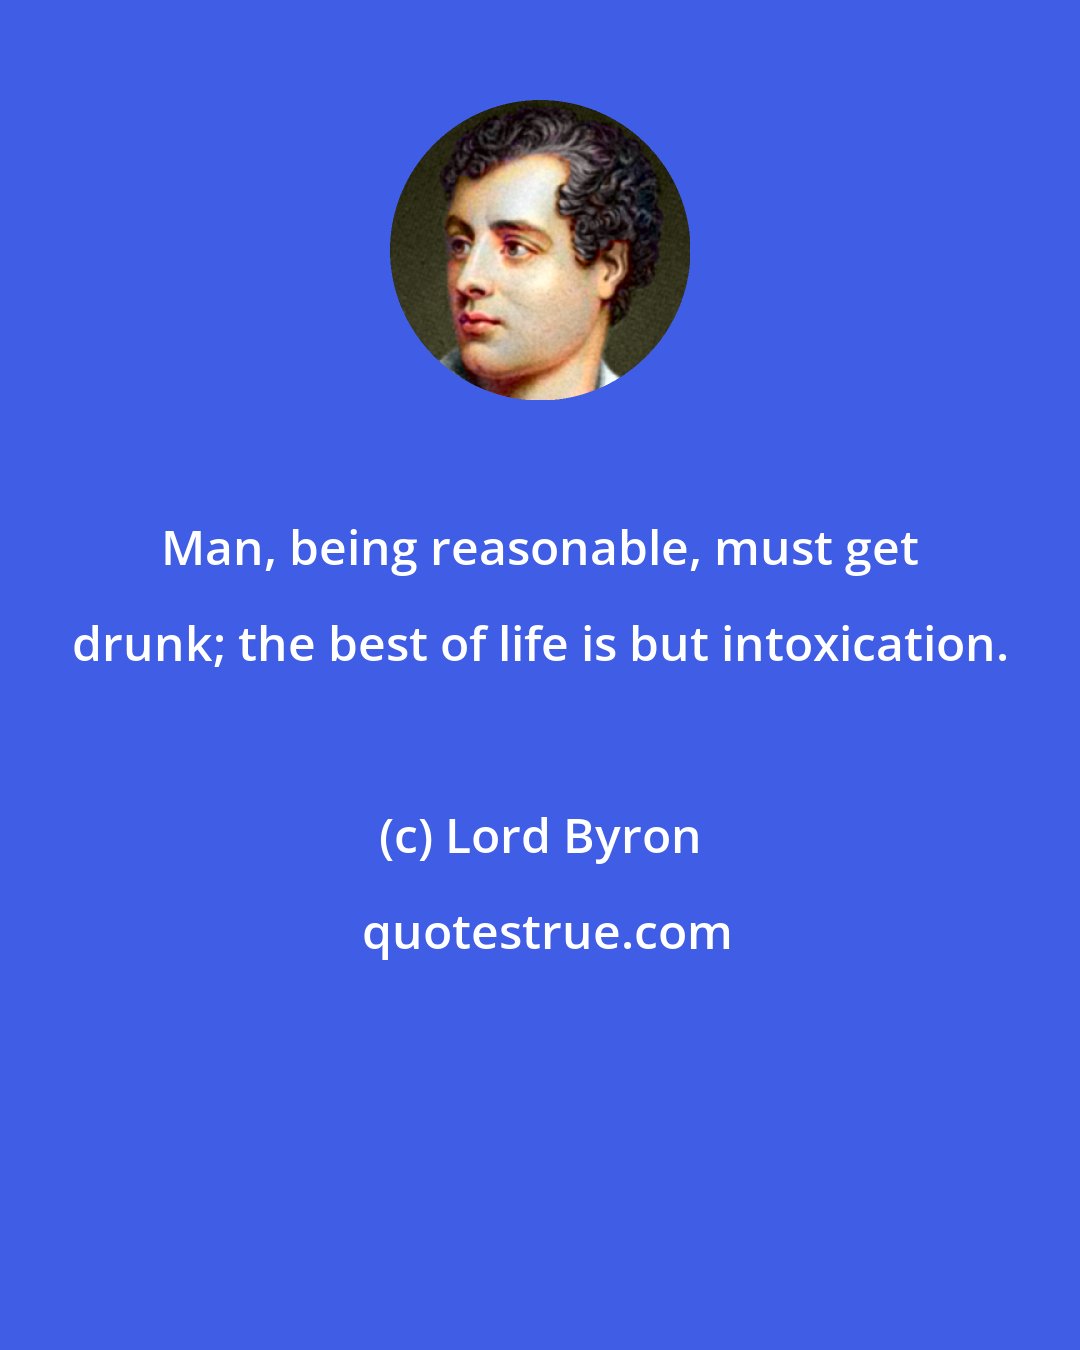 Lord Byron: Man, being reasonable, must get drunk; the best of life is but intoxication.